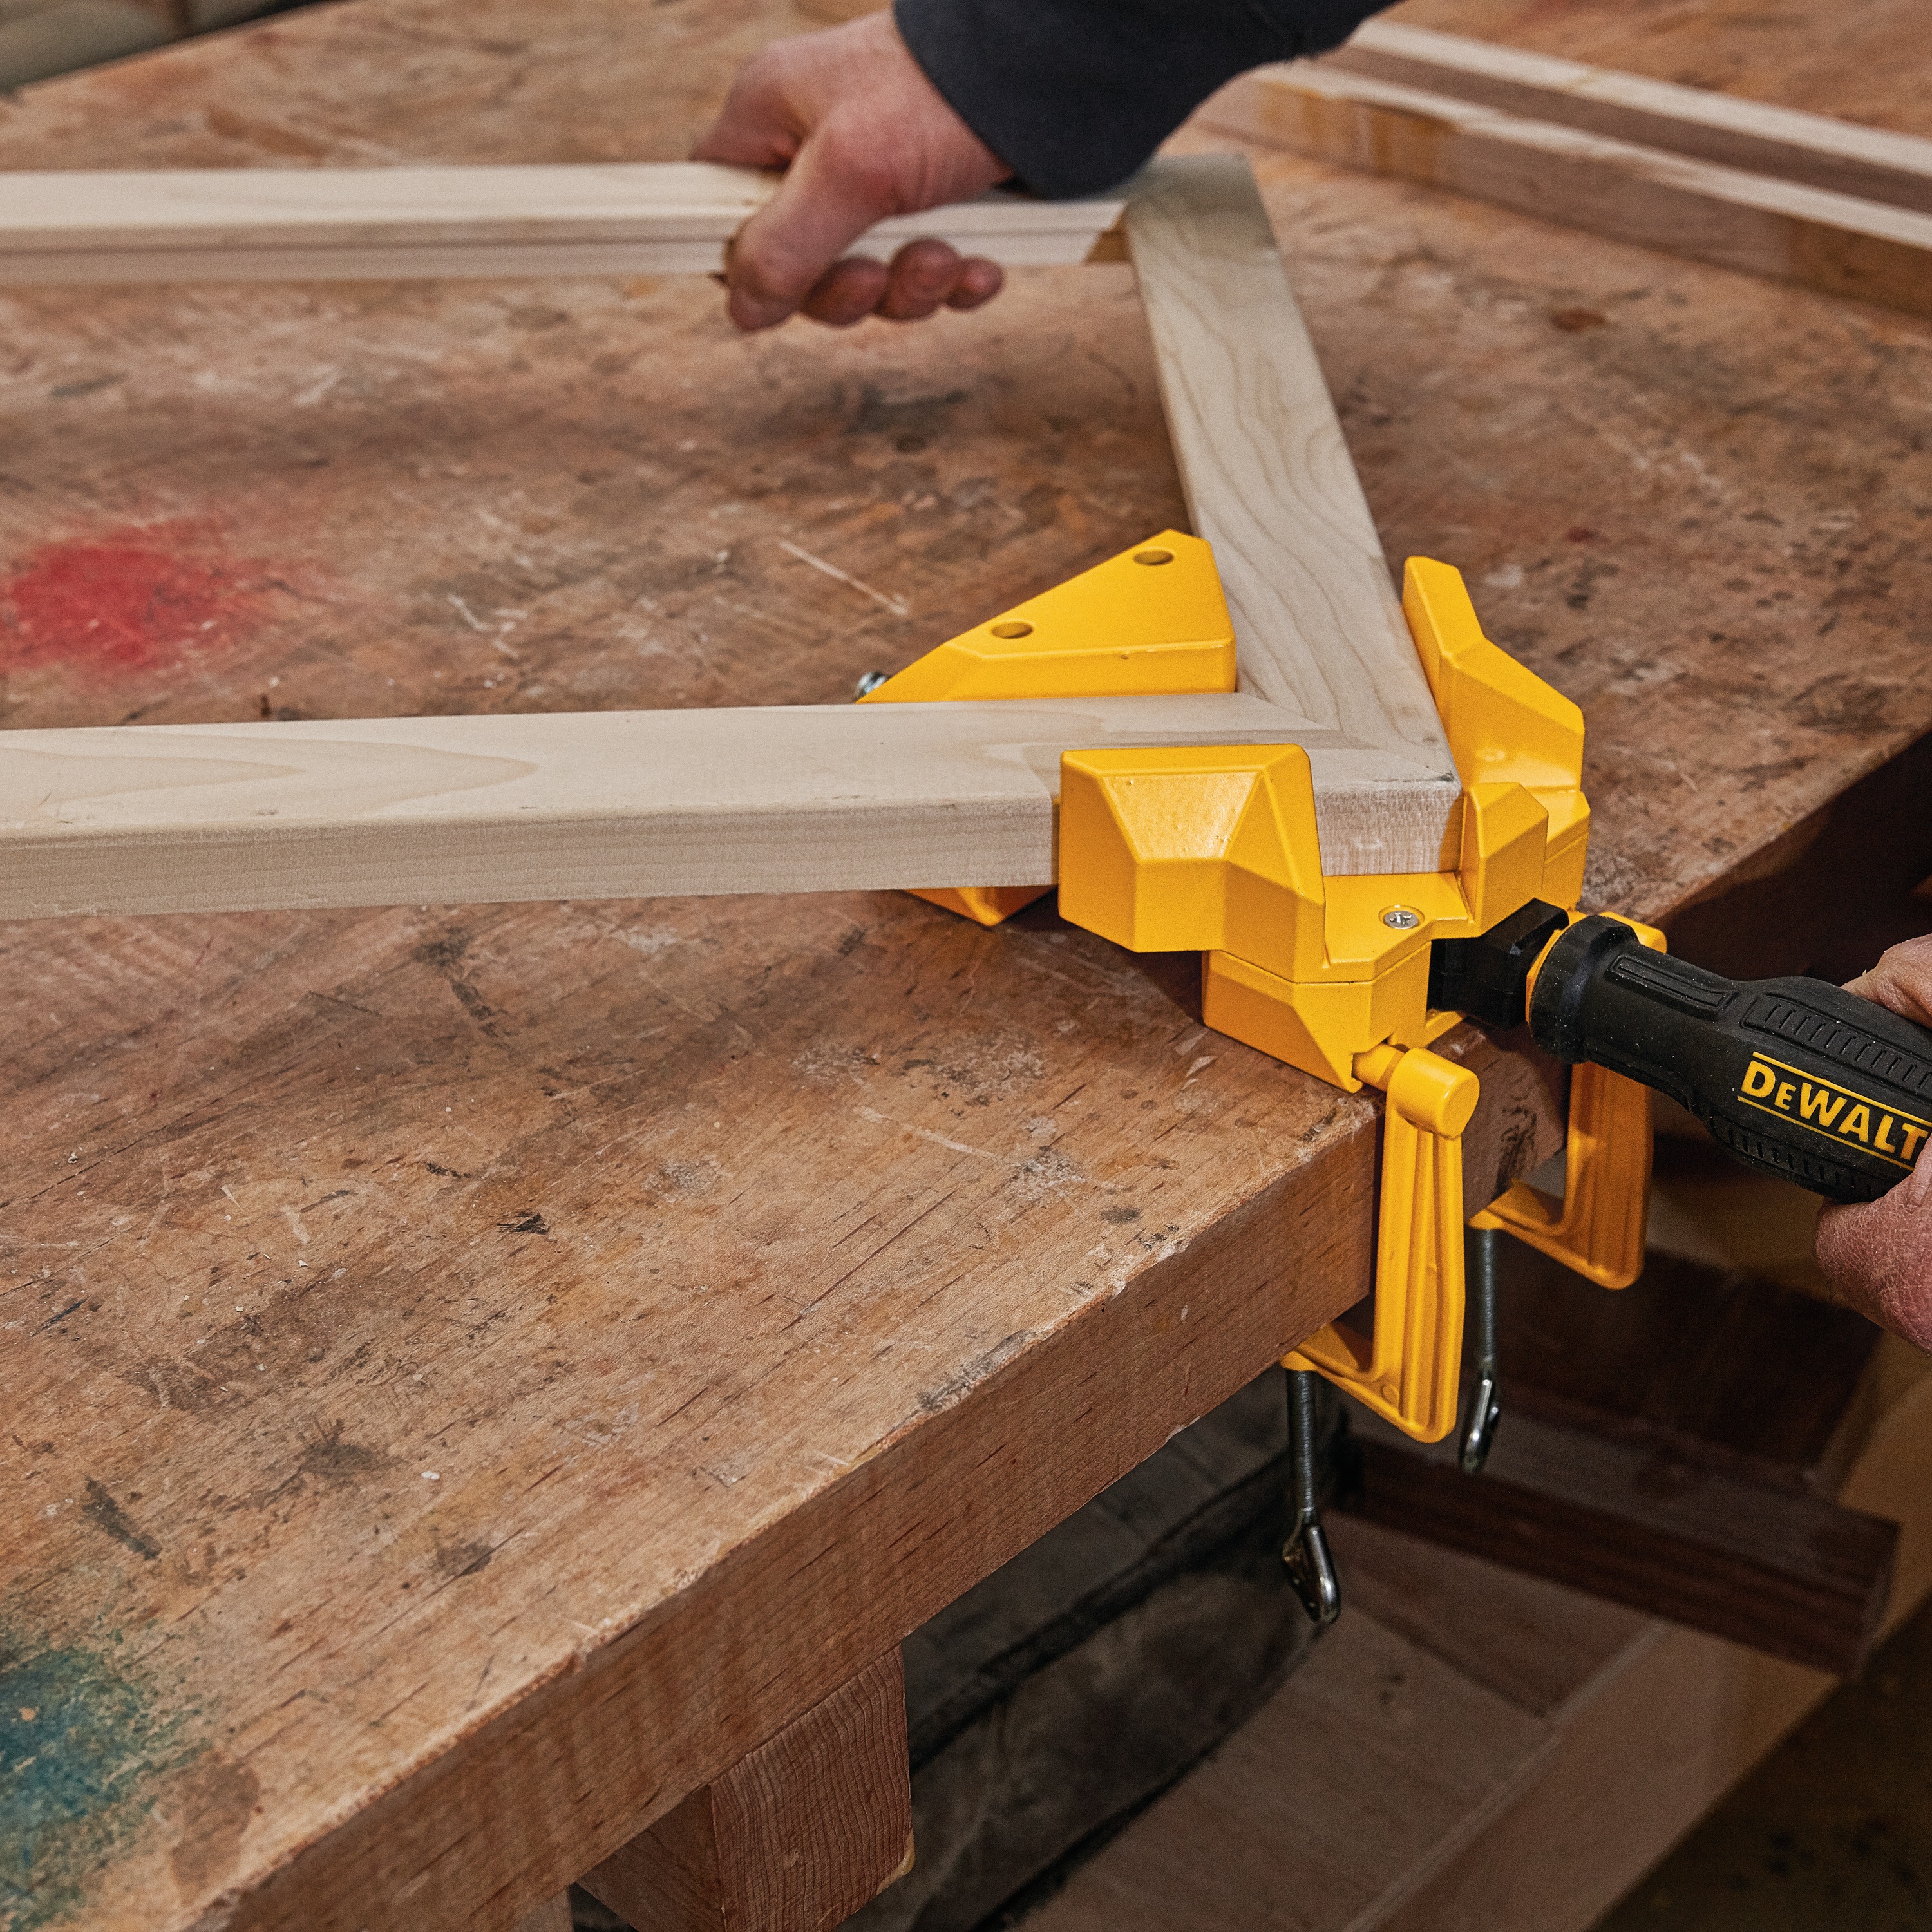 90 Degree Angle Clamp being used by a person on a wooden frame.